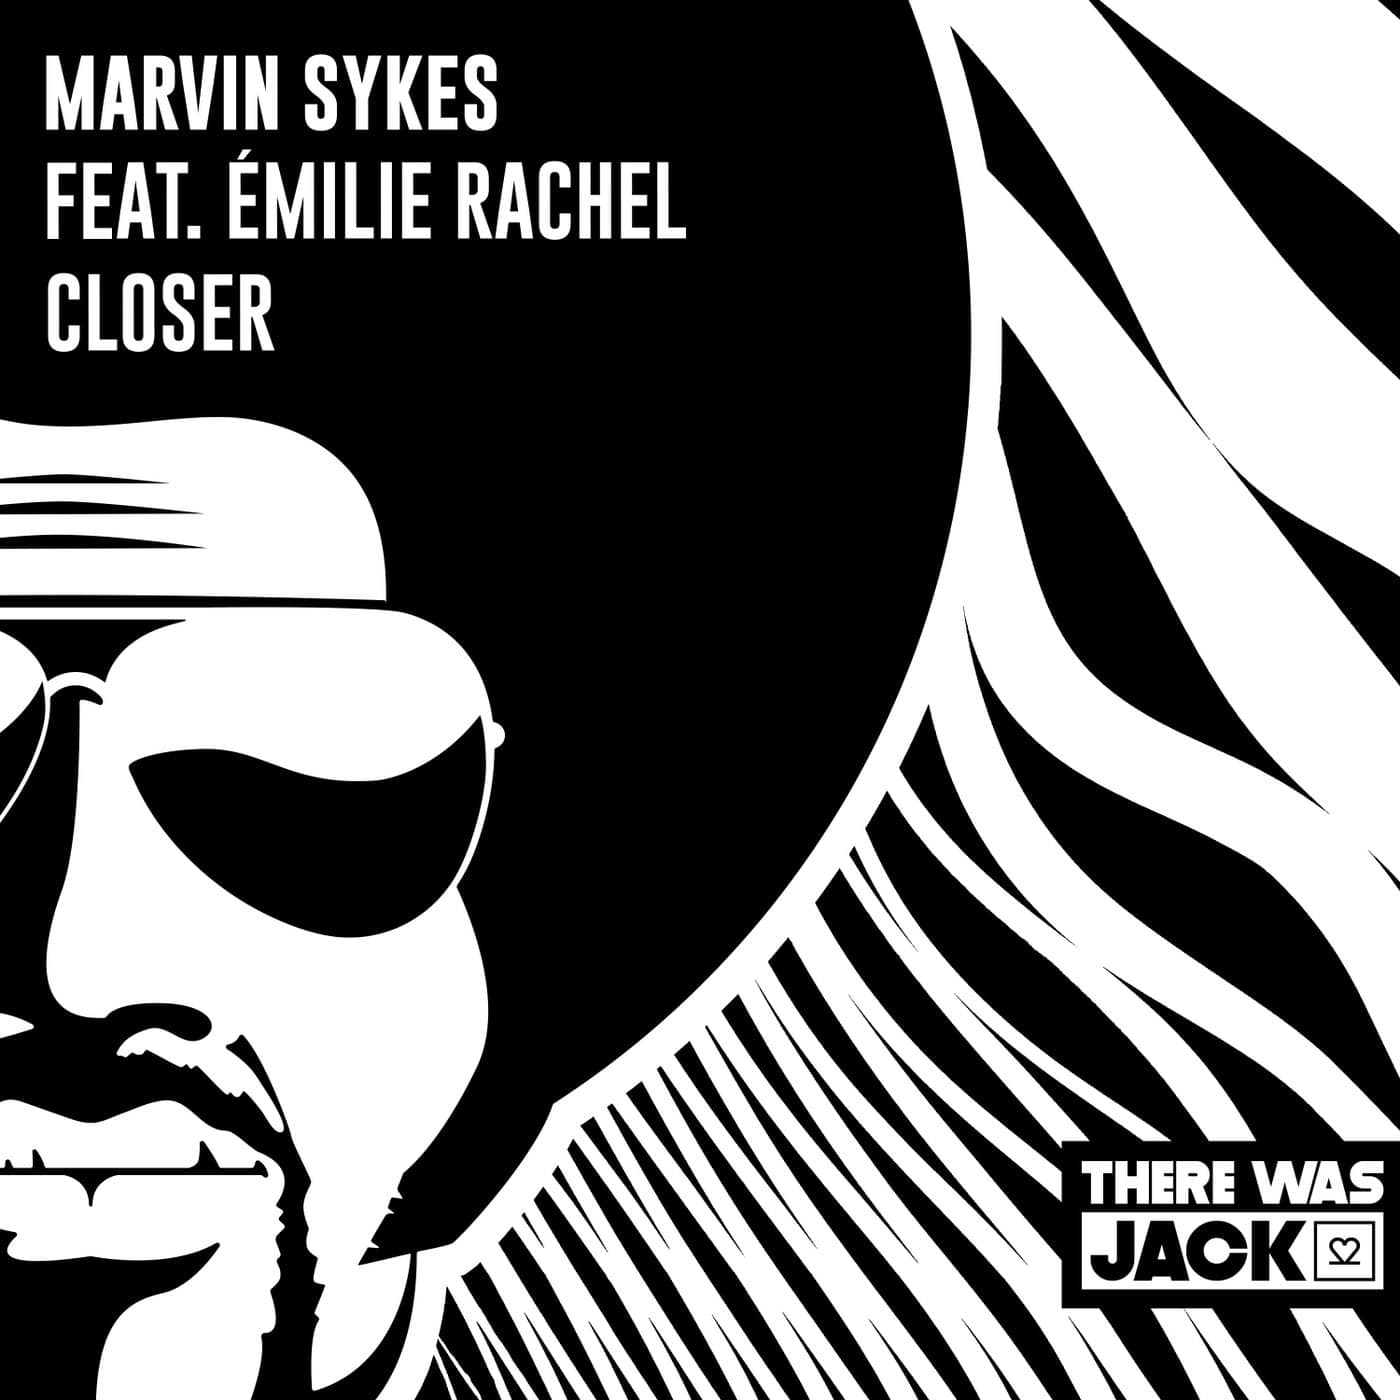 image cover: Marvin Sykes, Émilie Rachel - Closer (Extended Mix) on There Was Jack